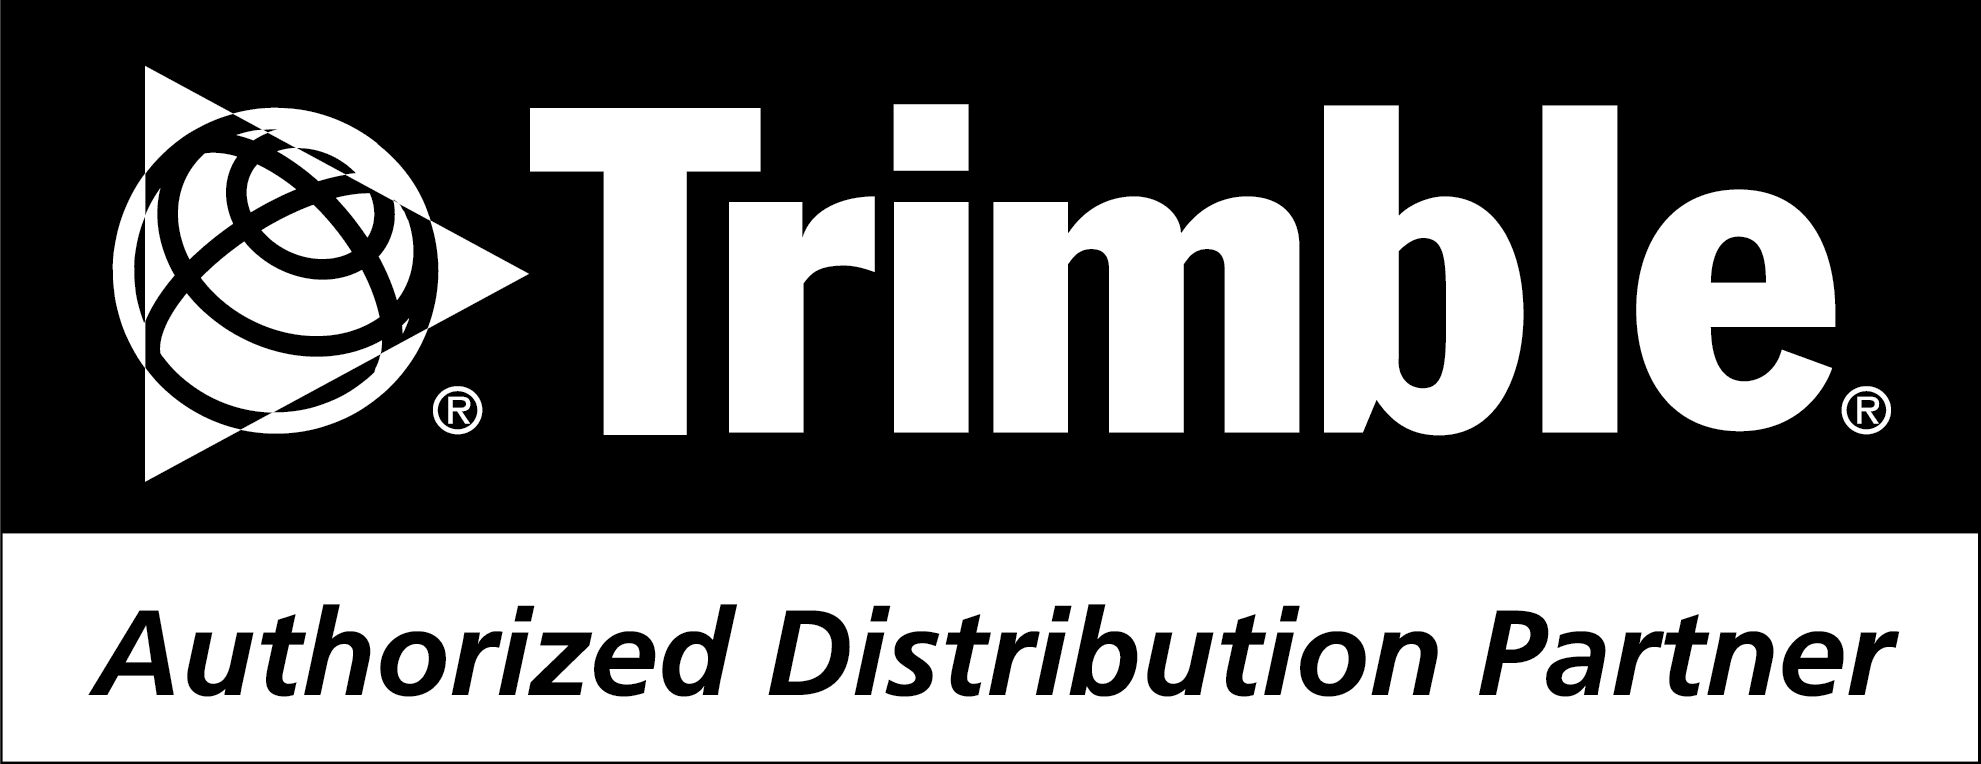 Trimble Logo - Land Surveying Equipment, GPS GNSS Receivers, Mapping & GIS Software